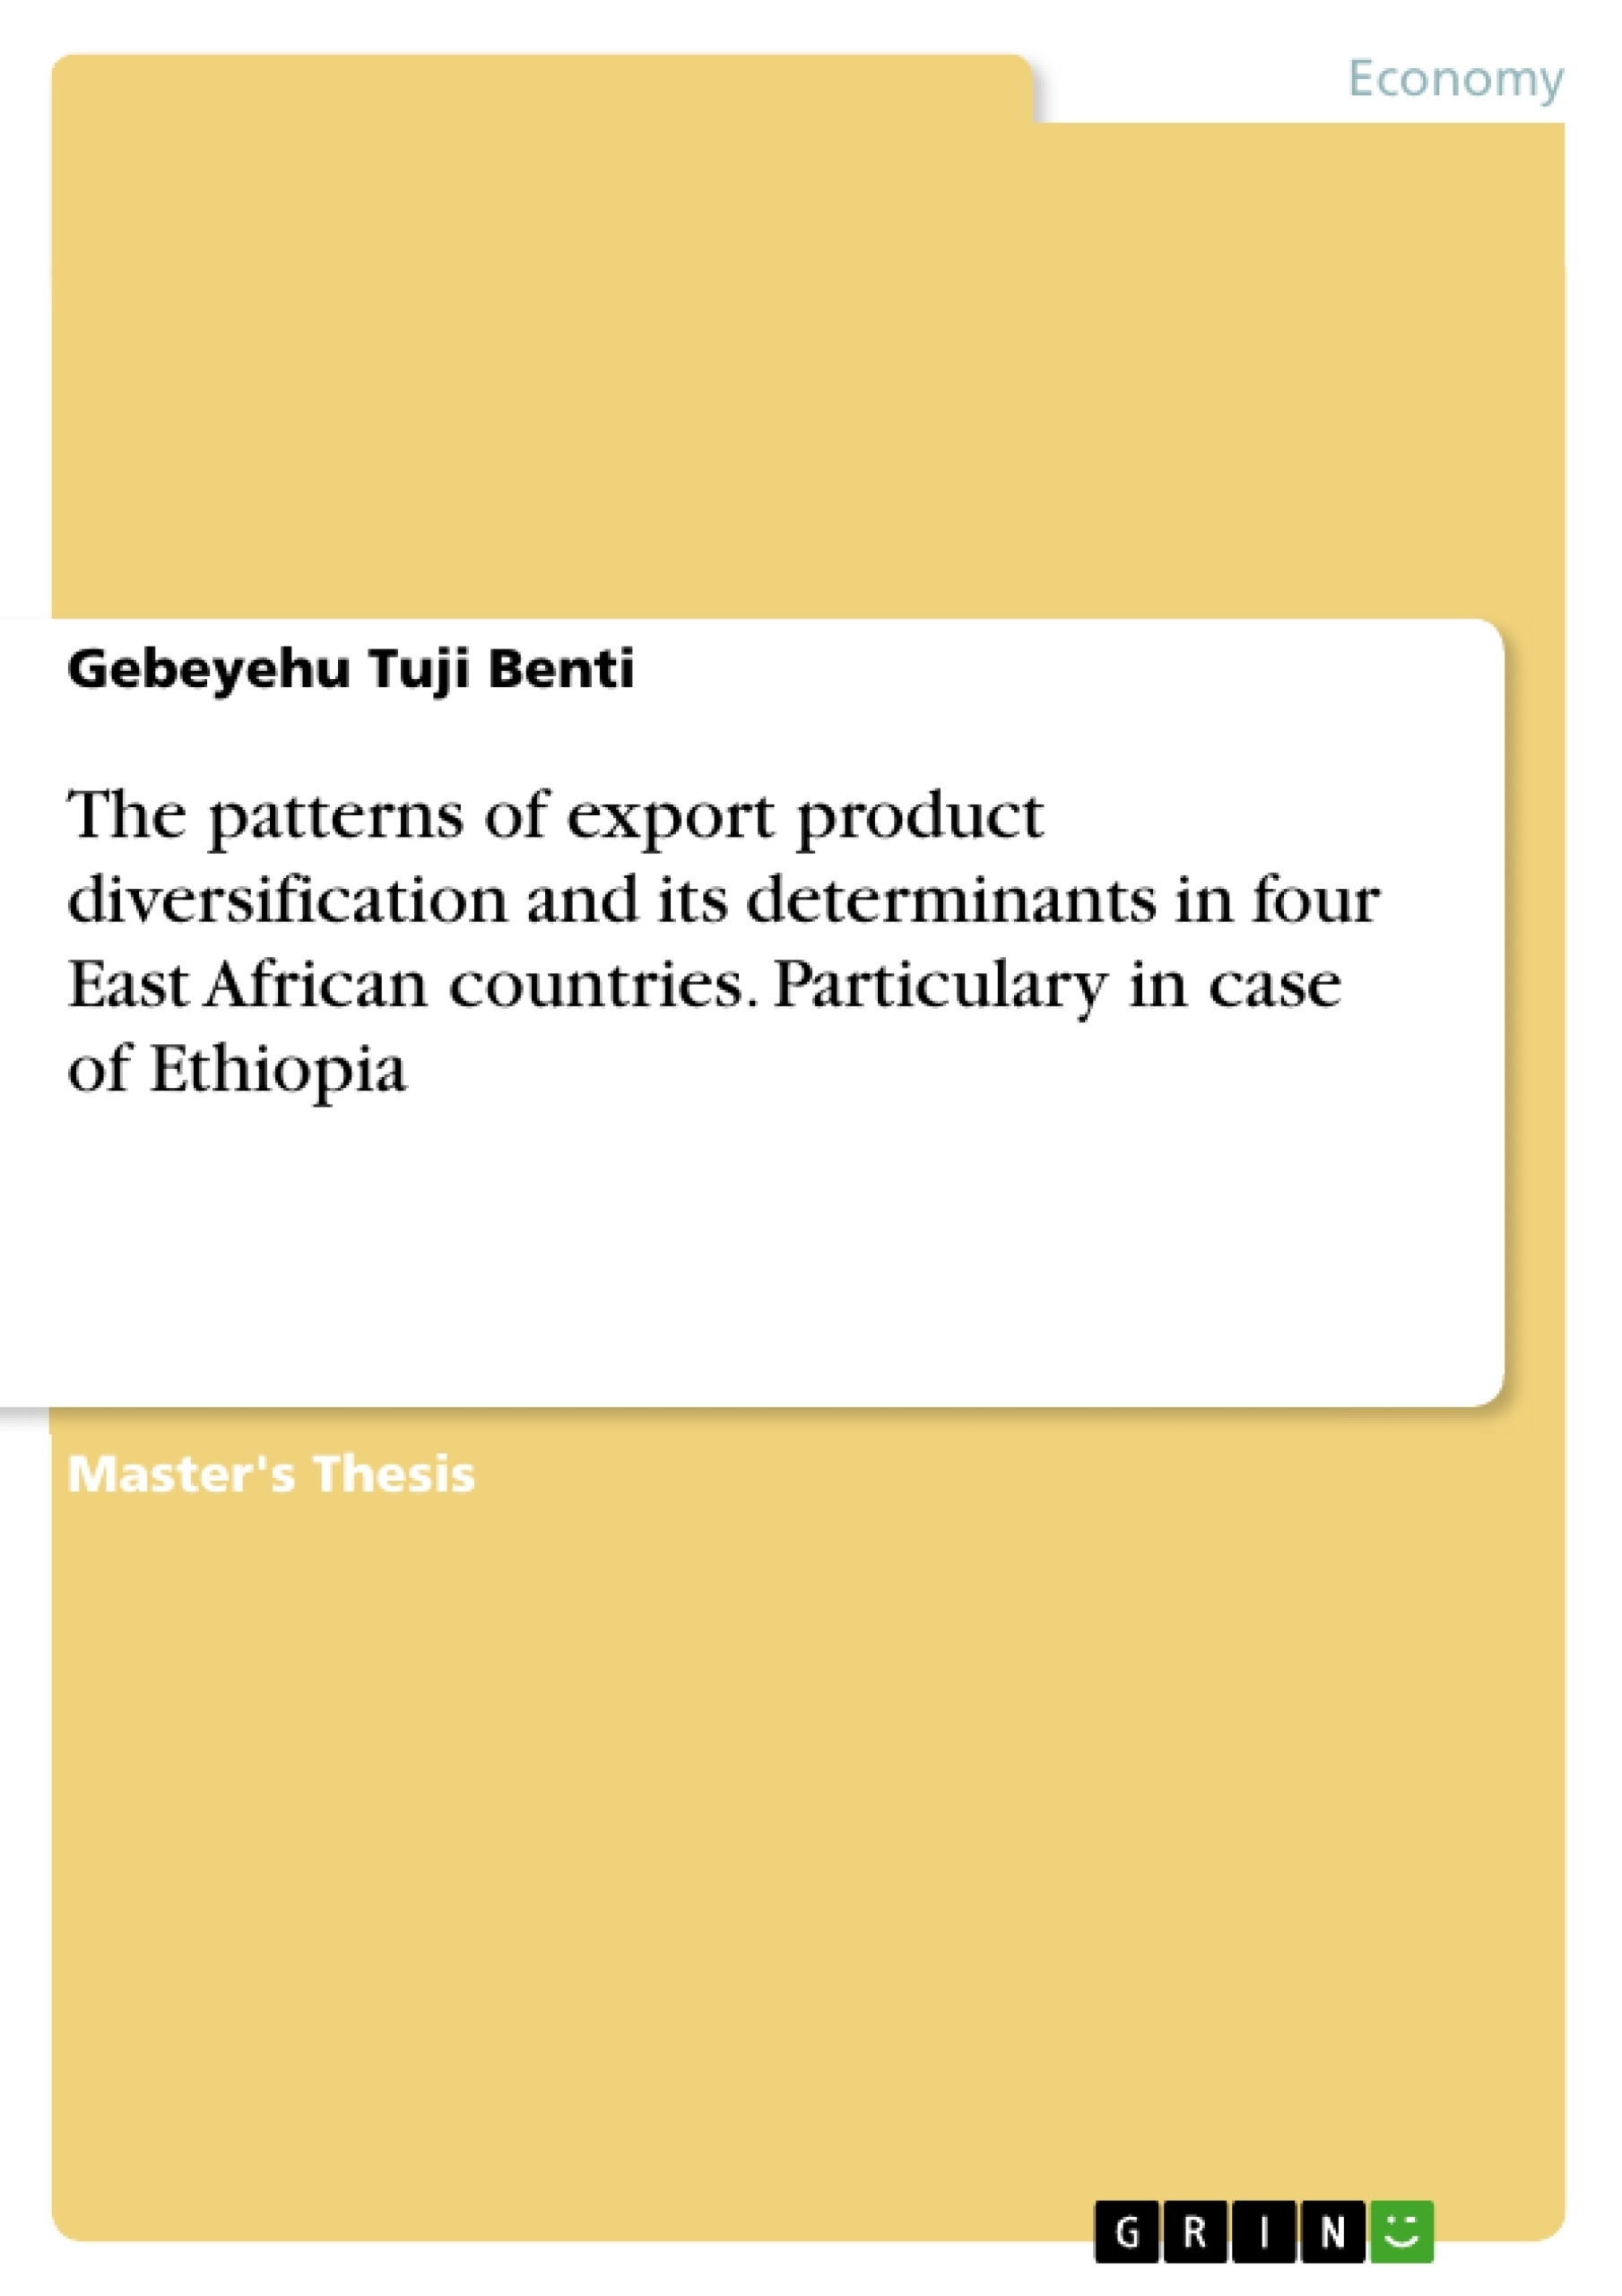 Título: The patterns of export product diversification and its determinants in four East African countries. Particulary in case of Ethiopia